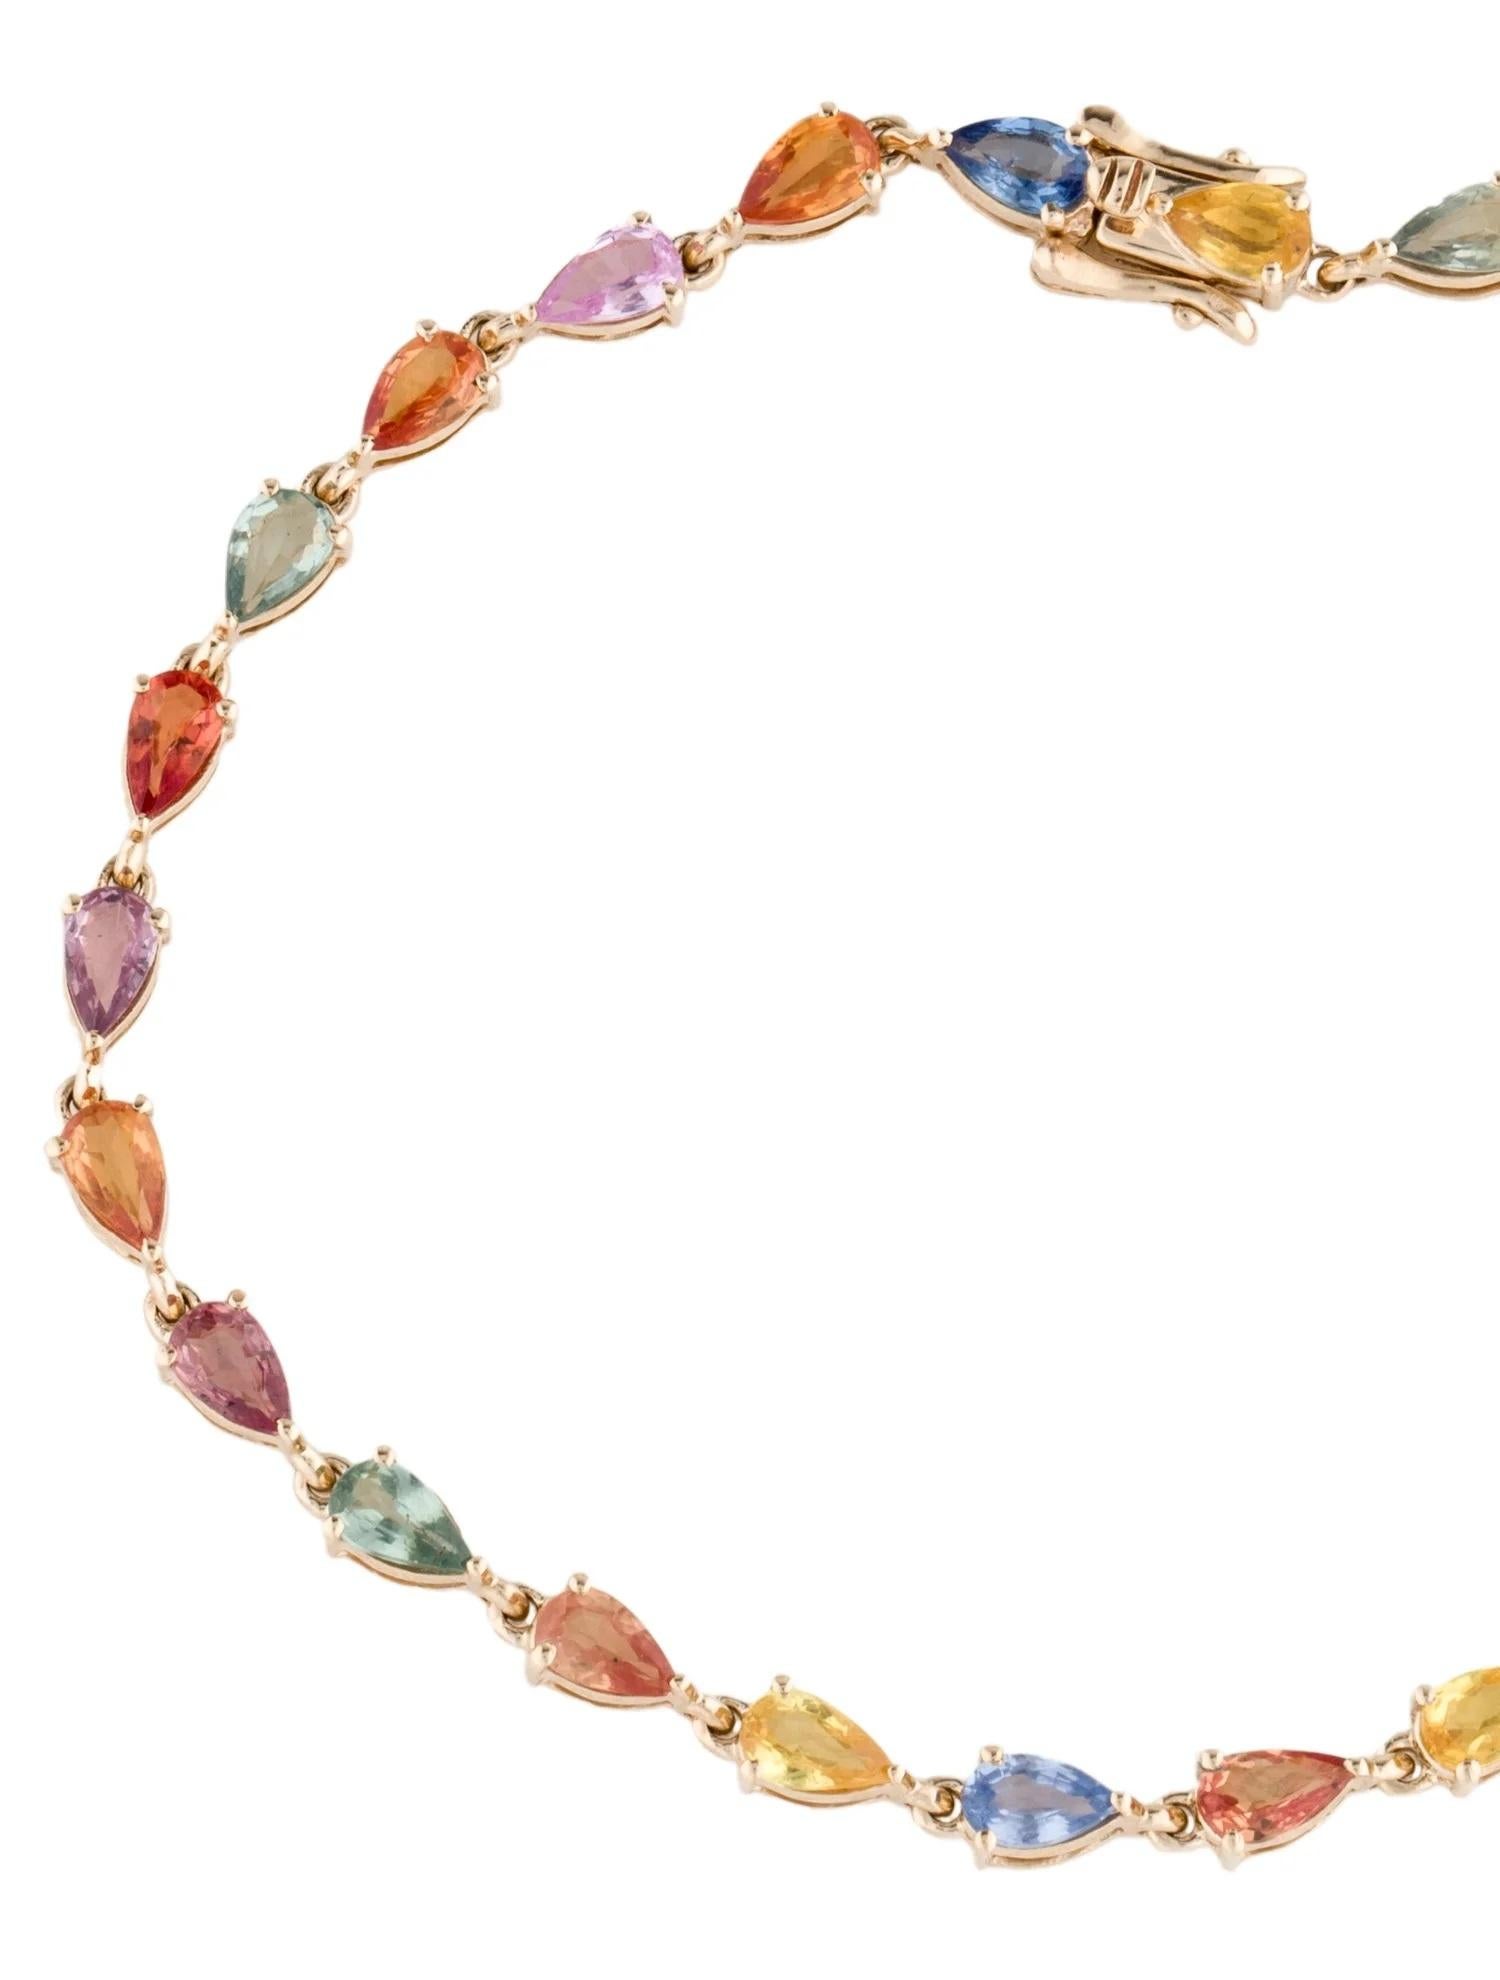 Introducing a masterpiece of fine jewelry, this 14K yellow gold bracelet is a celebration of color and light, featuring an exquisite array of 5.25 carats of pear brilliant sapphires. Each of the 25 sapphires showcases a unique hue - from the deep